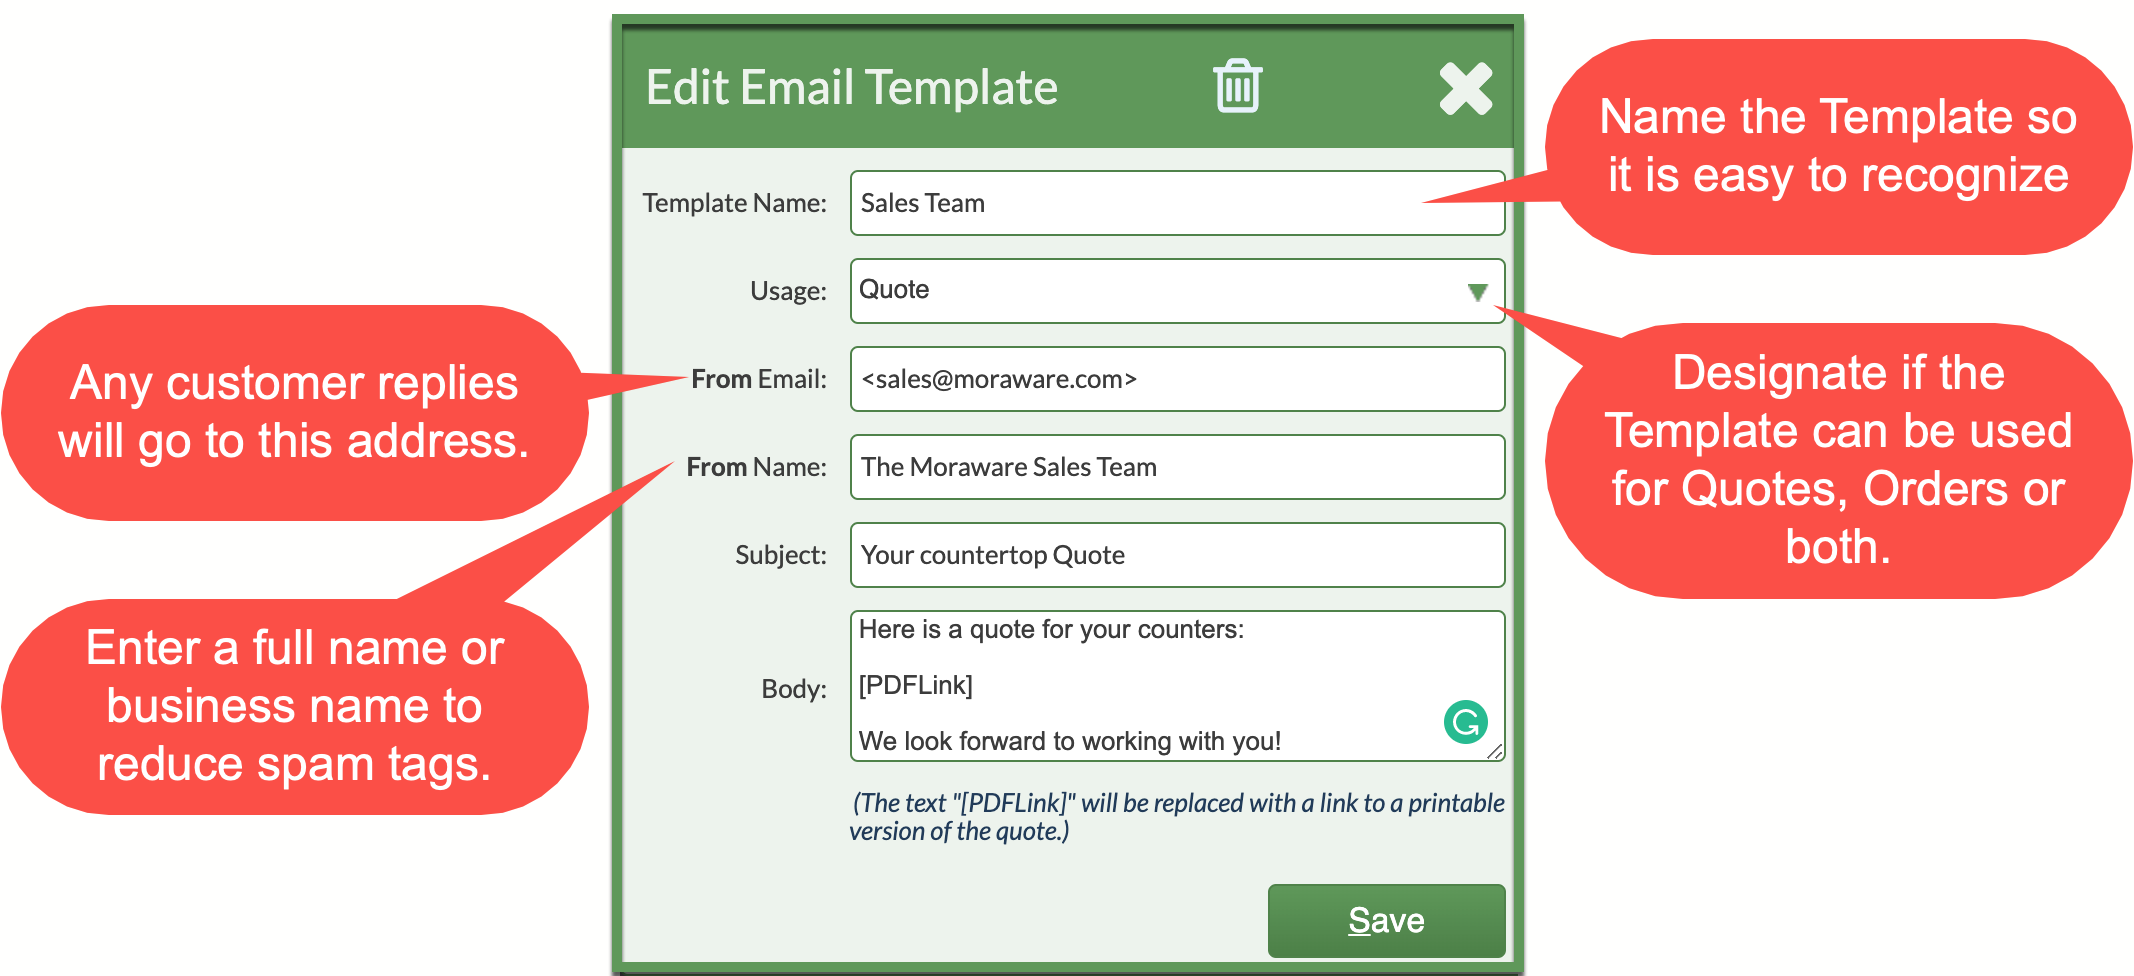 Set up email template with from email, user name, usage, subject line and body